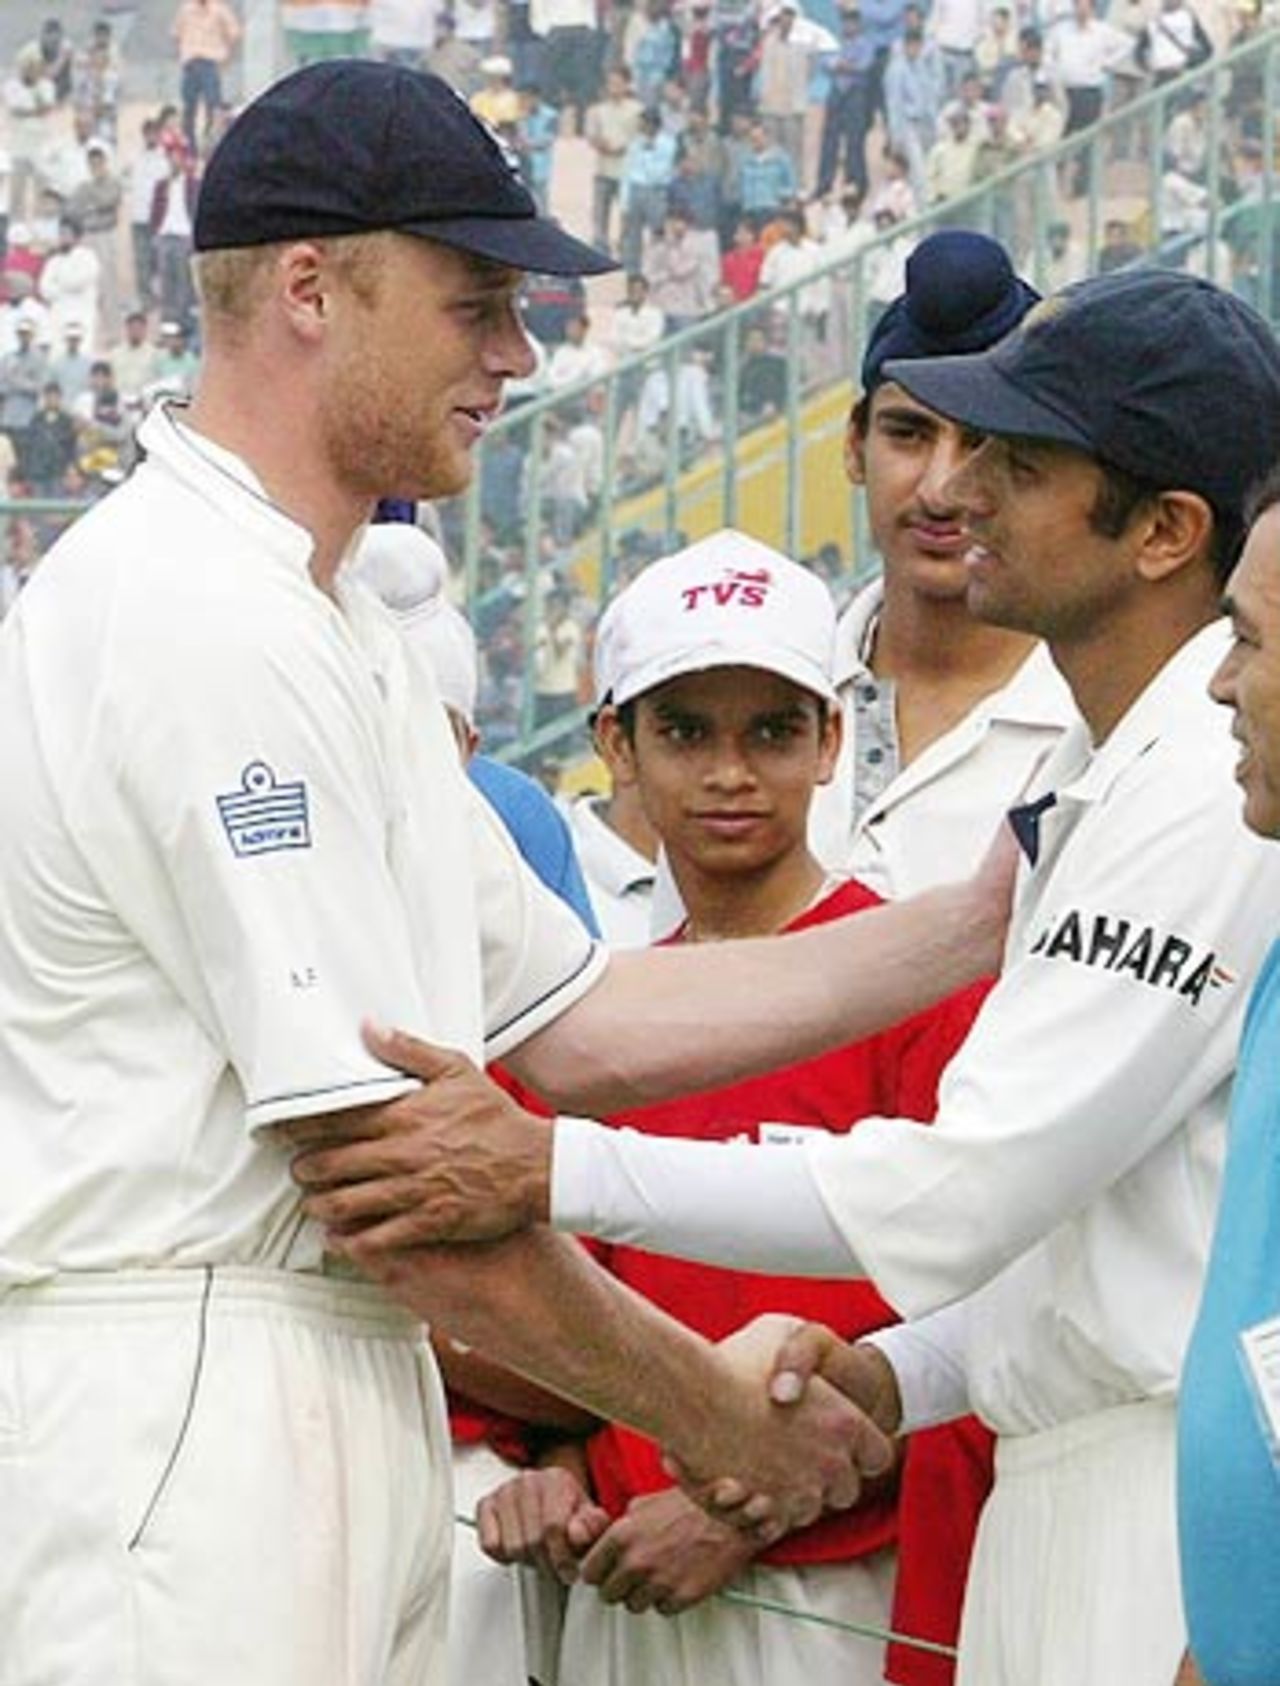 Andrew Flintoff congratulates Rahul Dravid after the Mohali Test, India v England, 2nd Test, Mohali, March 13, 2006